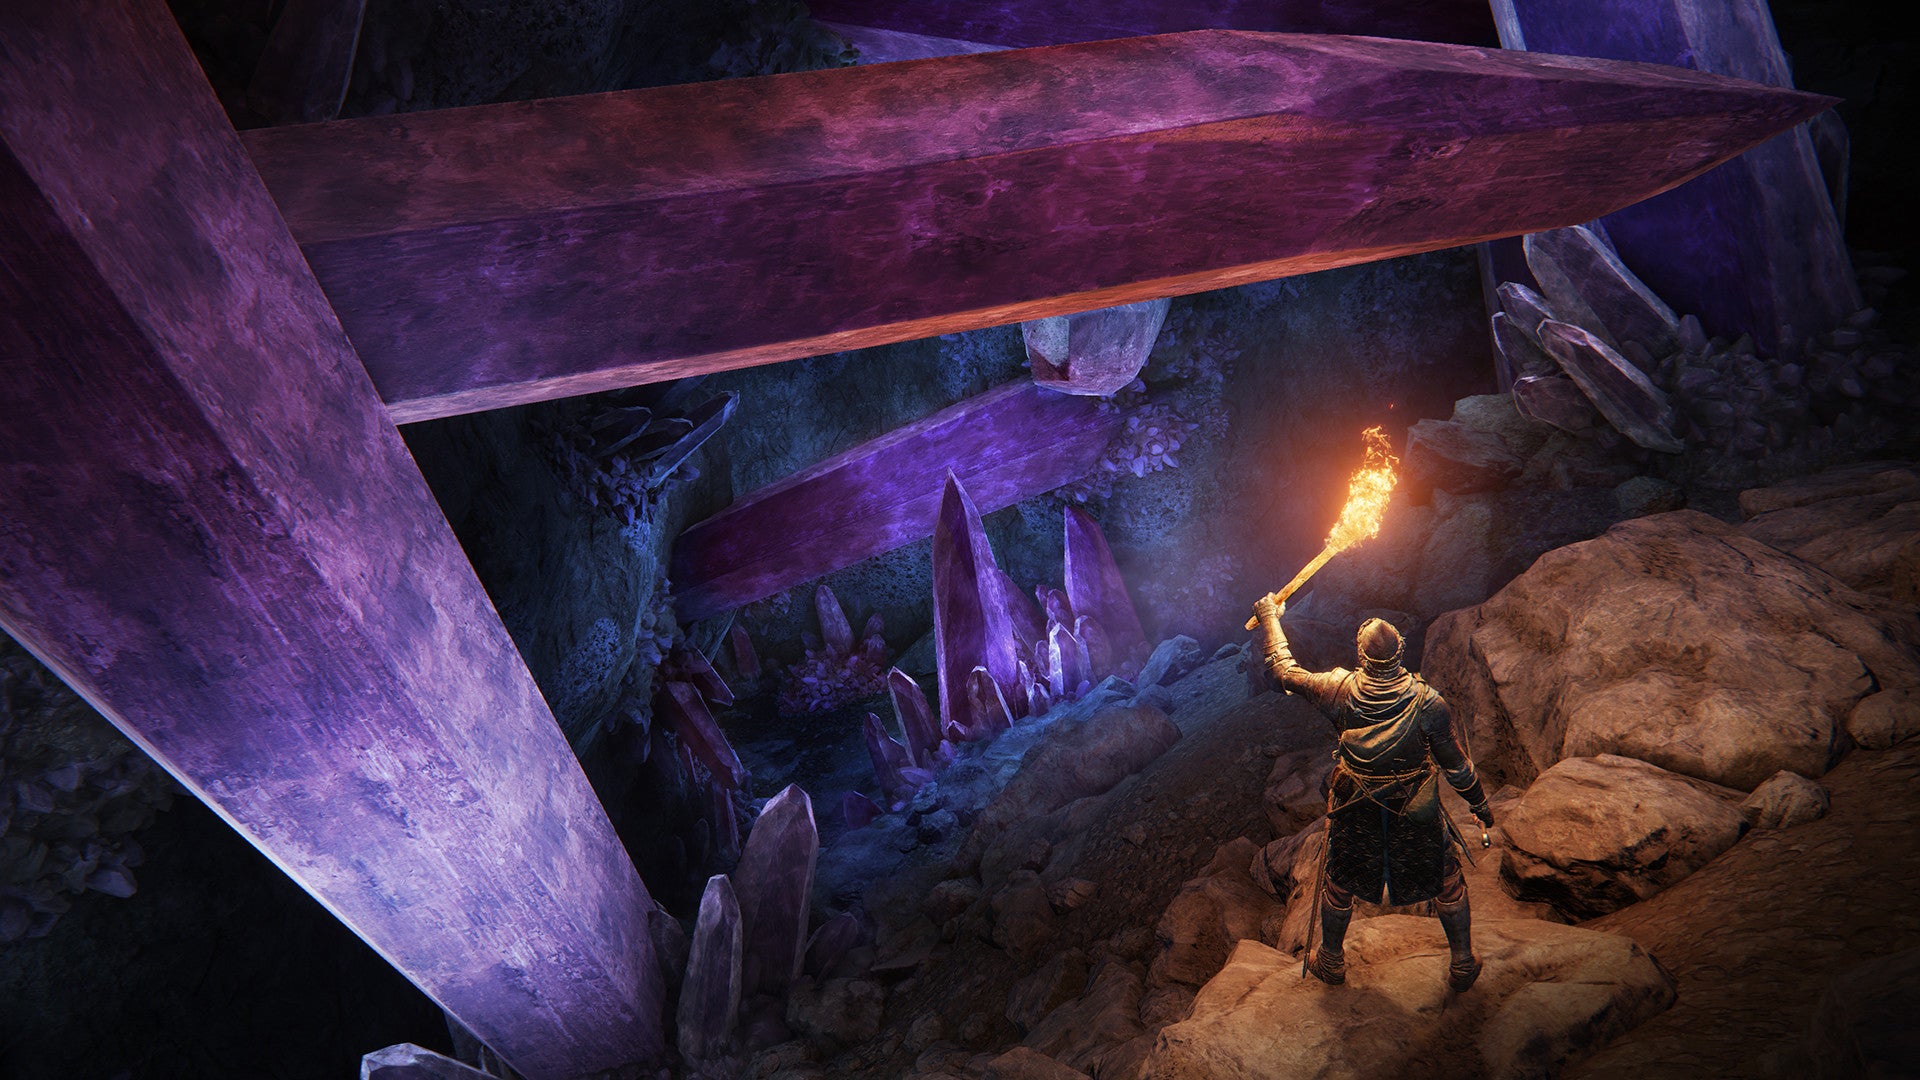 An Elden Ring character holds up a torch to illuminate a cavern filled with giant gemstones.